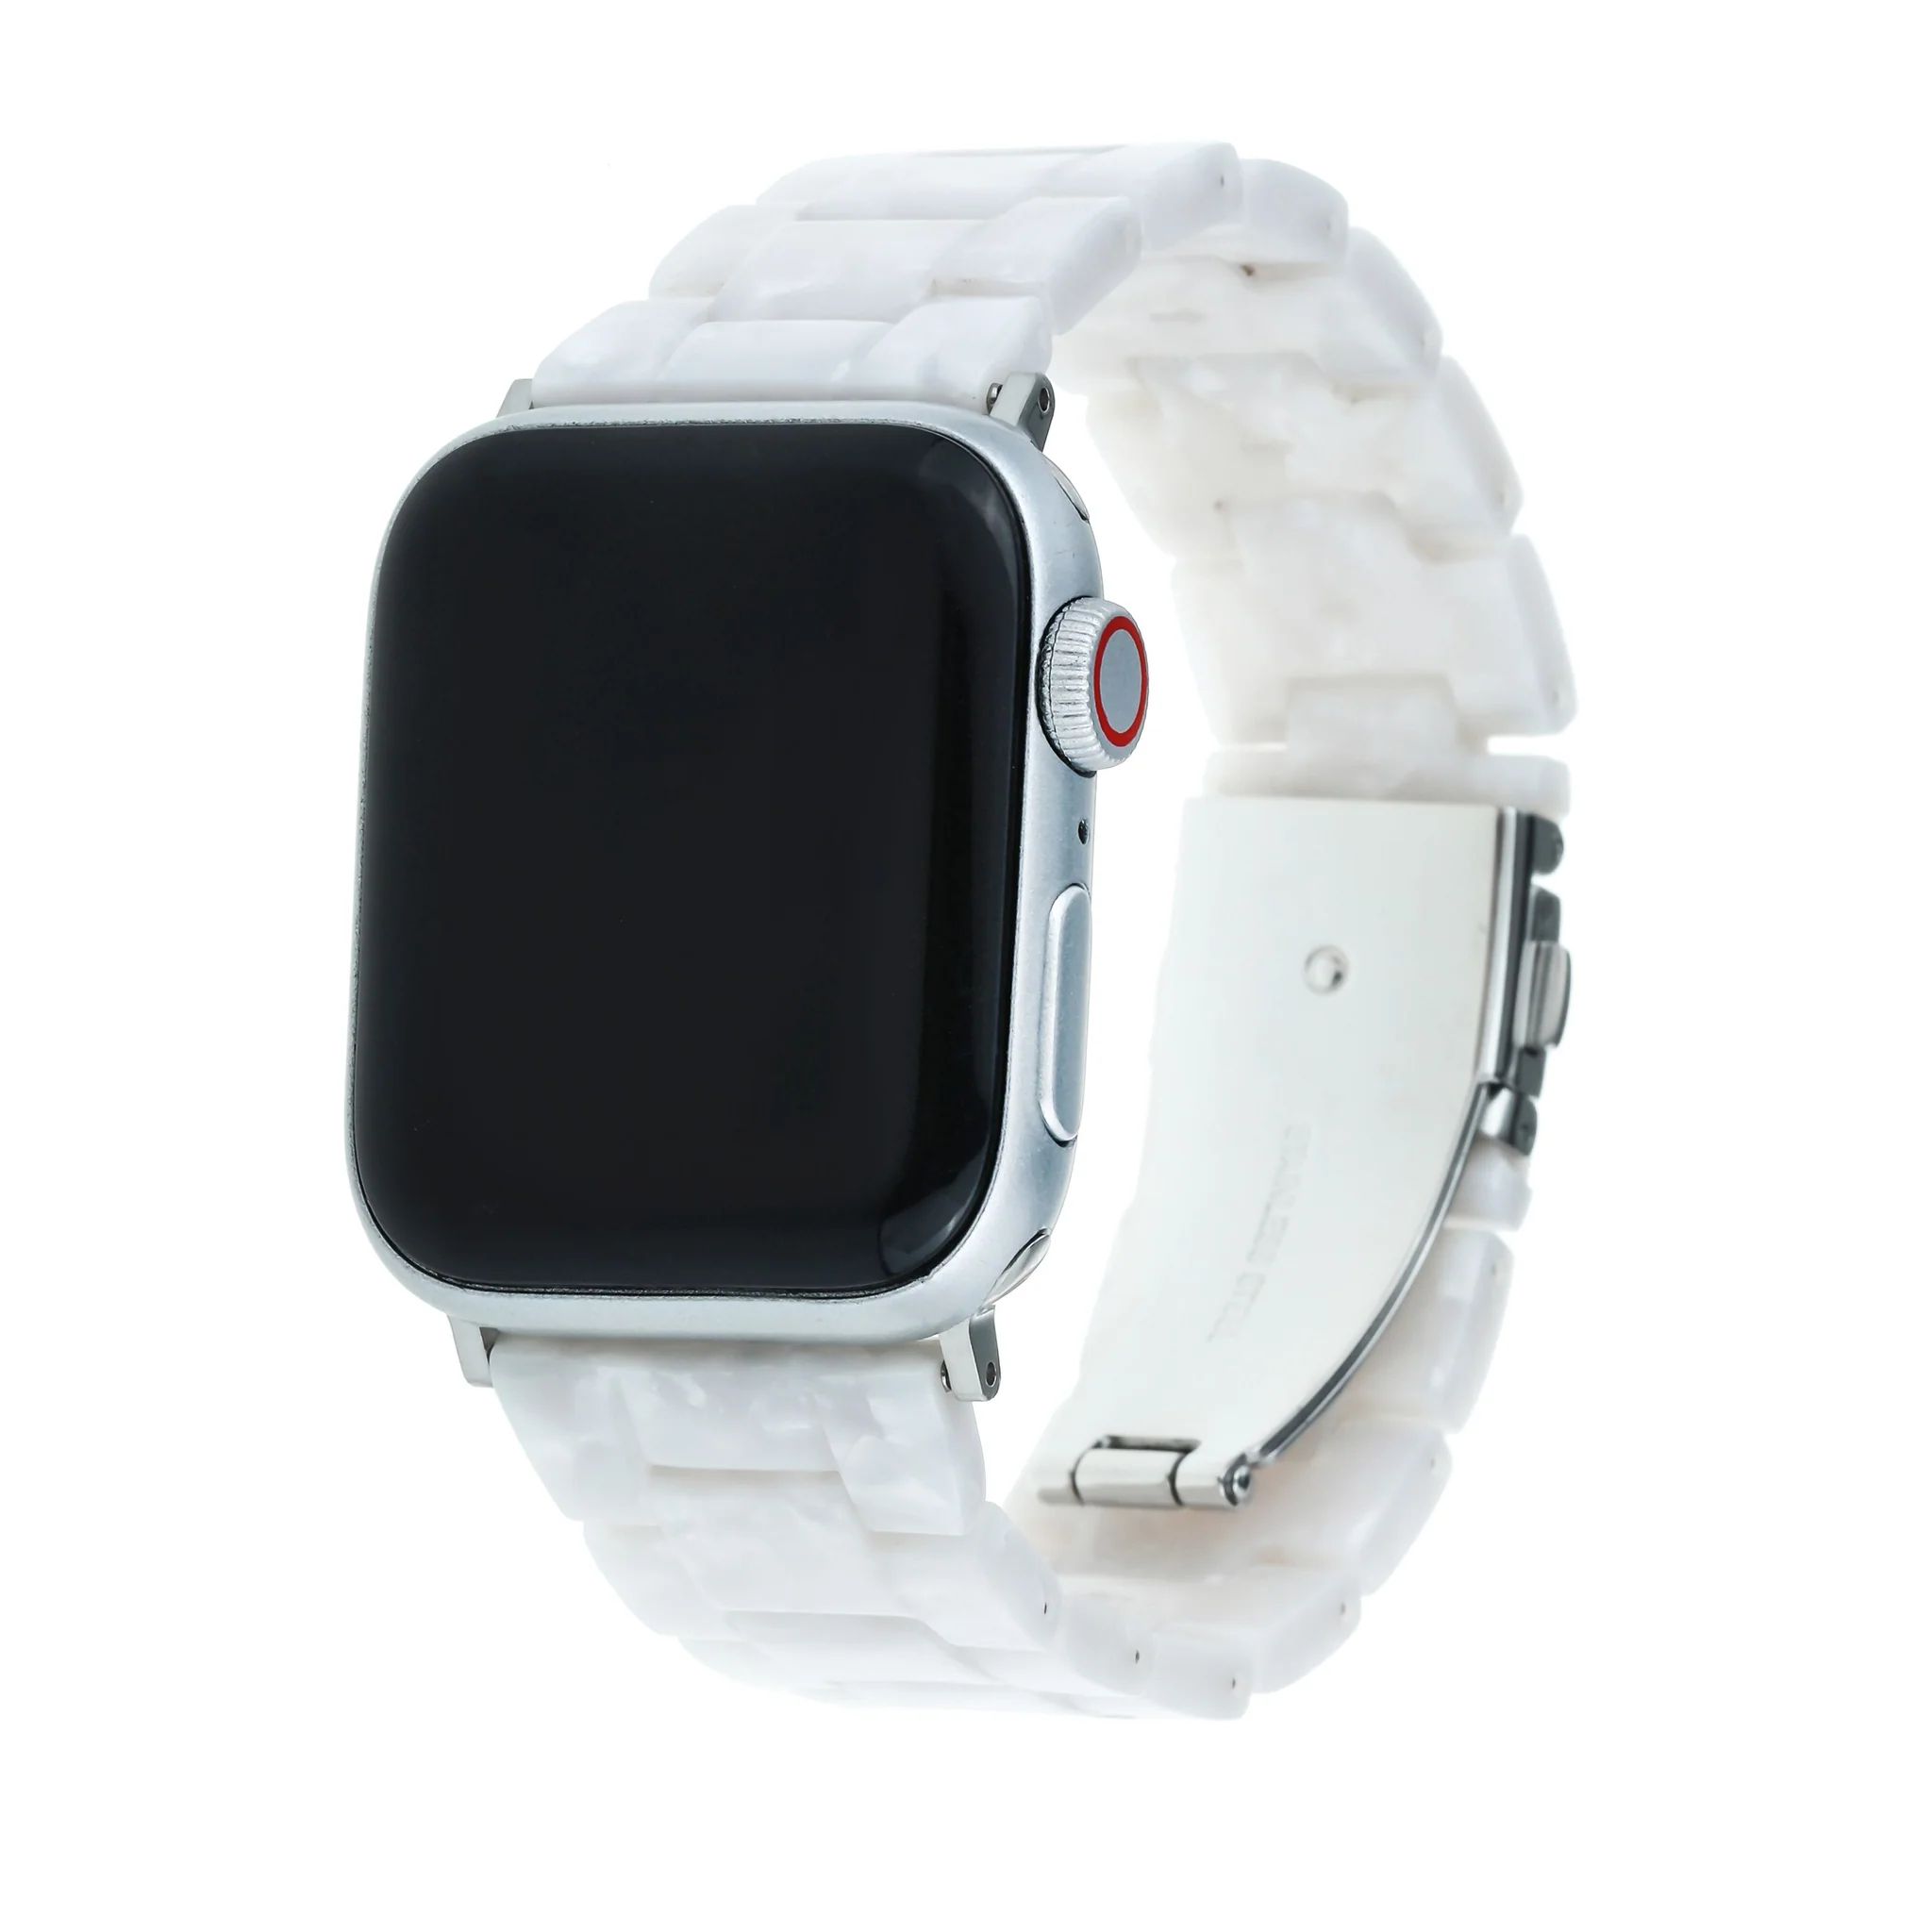 Acrylic Apple Watch Strap in White Opal | Victoria Emerson